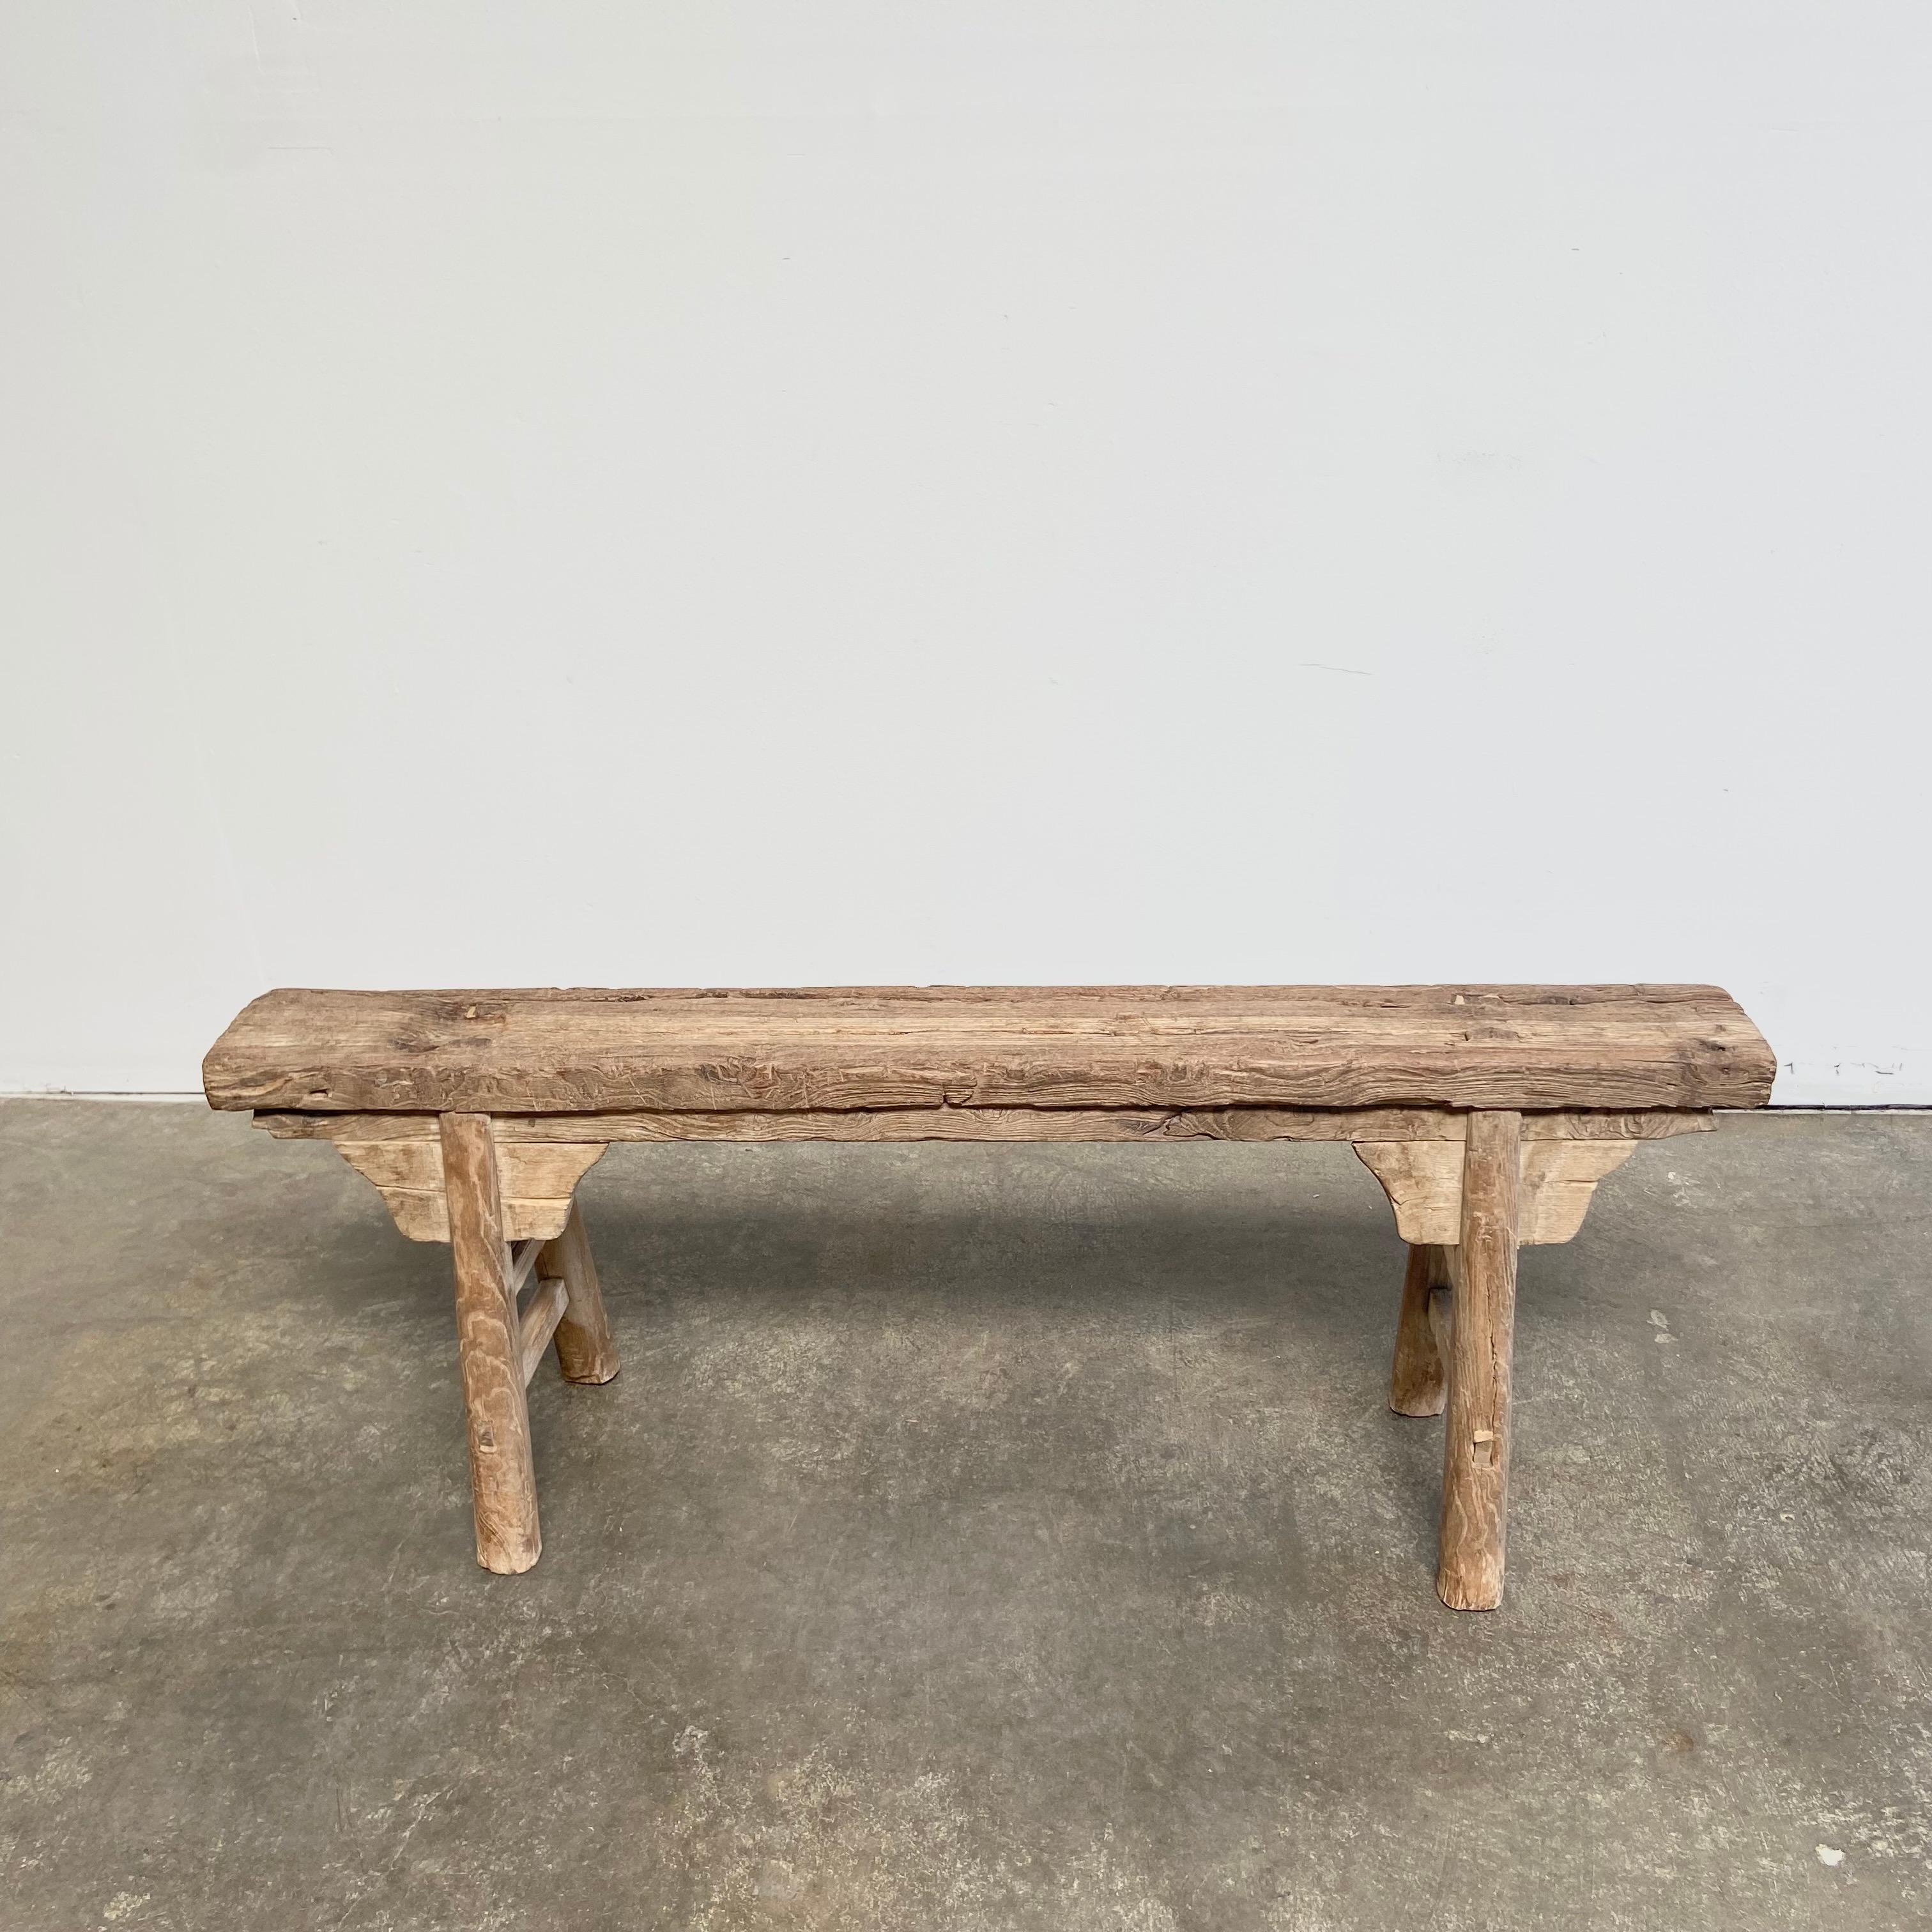 Vintage antique elm wood stool
These are the real vintage antique elm wood benches! Beautiful antique patina, with weathering and age, these are solid and sturdy ready for daily use, use as as a table behind a sofa, stool, coffee table, they are